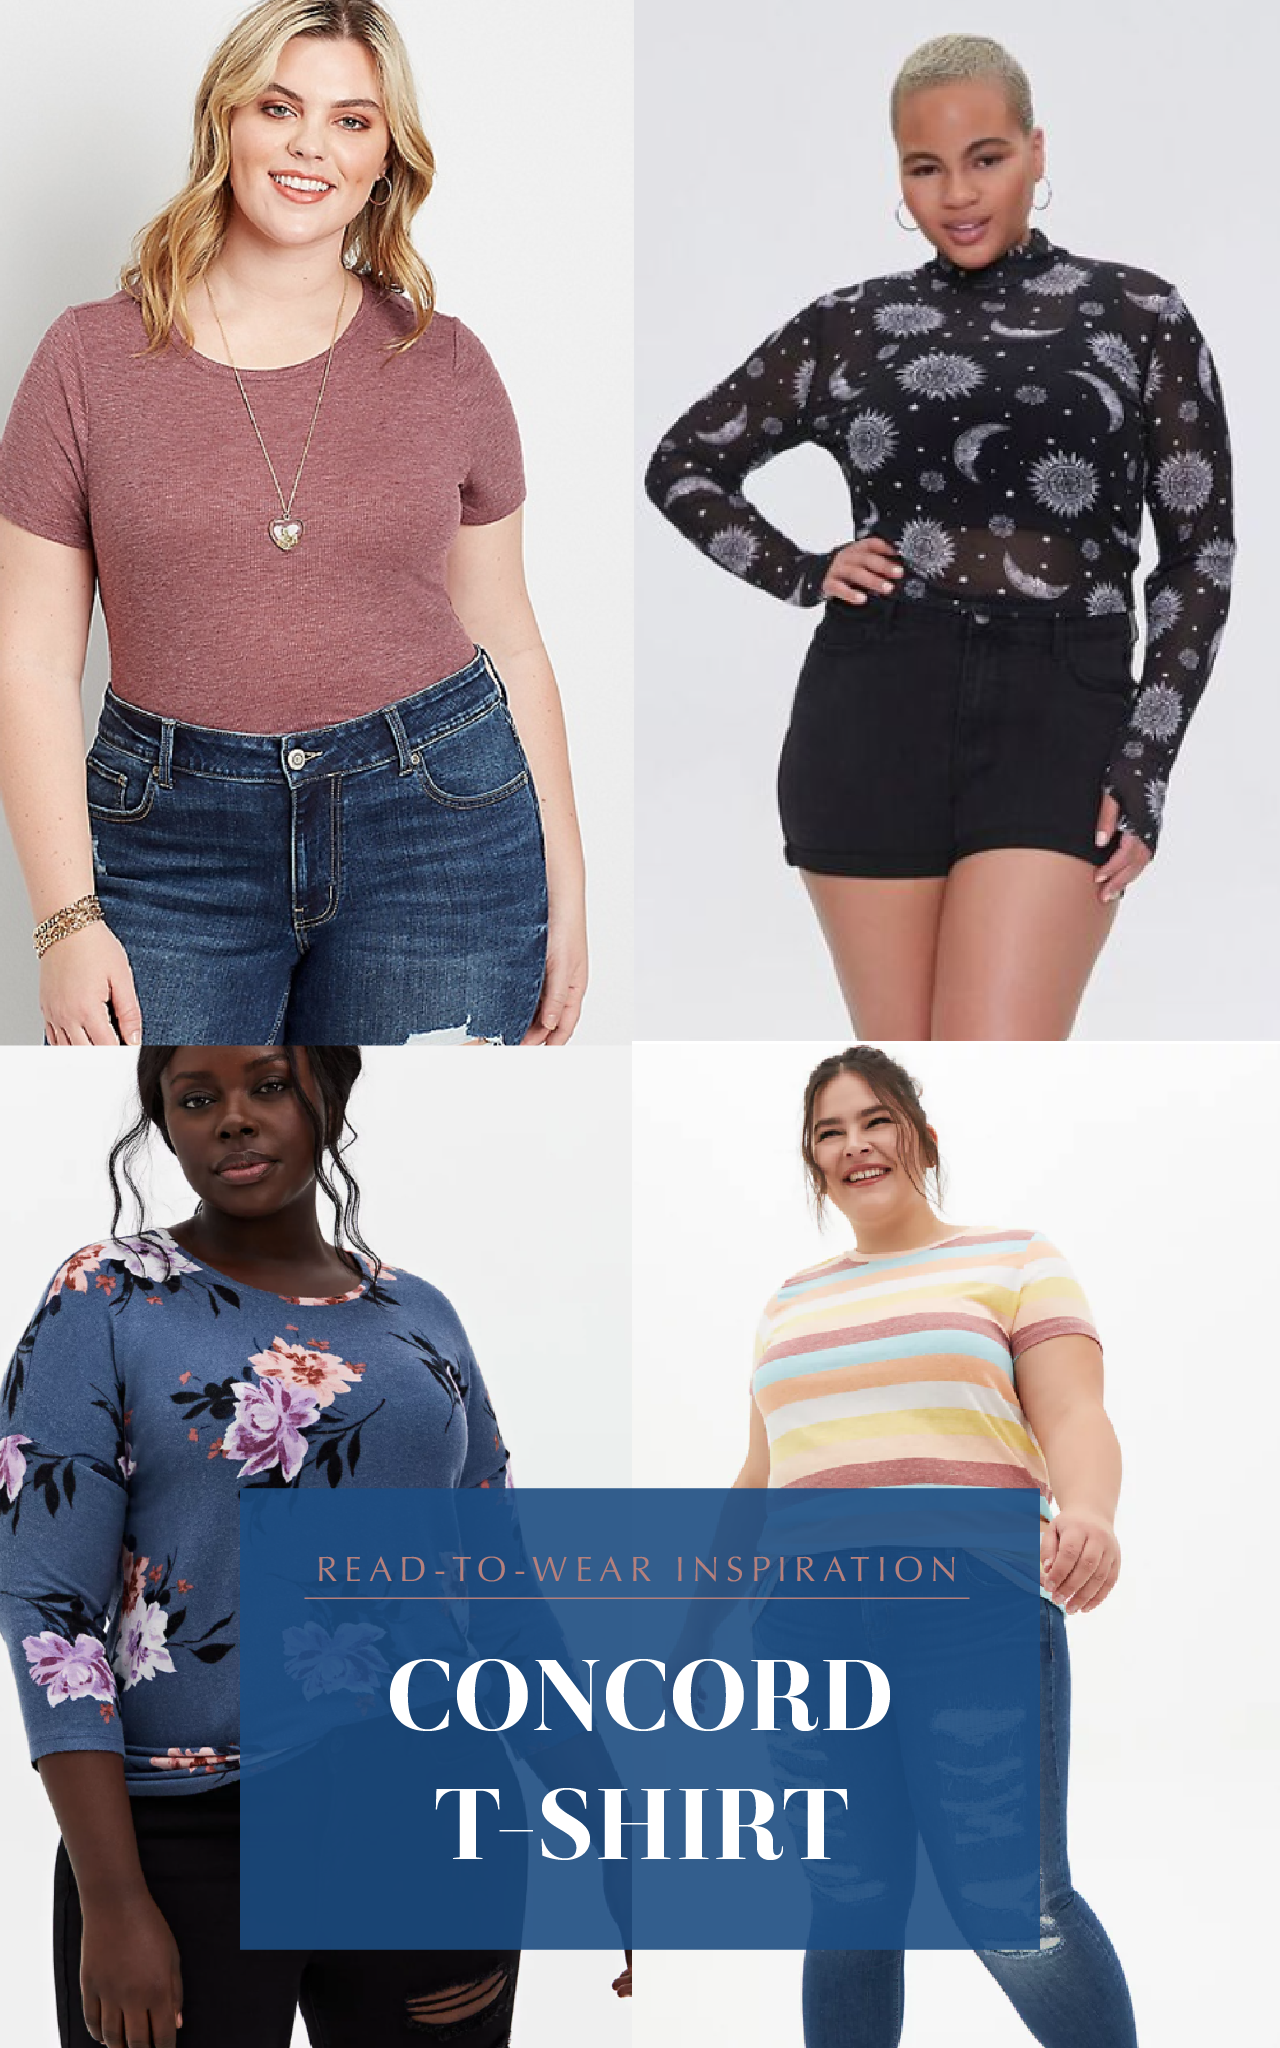 Concord T-Shirt Inspiration from Ready to Wear | Cashmerette